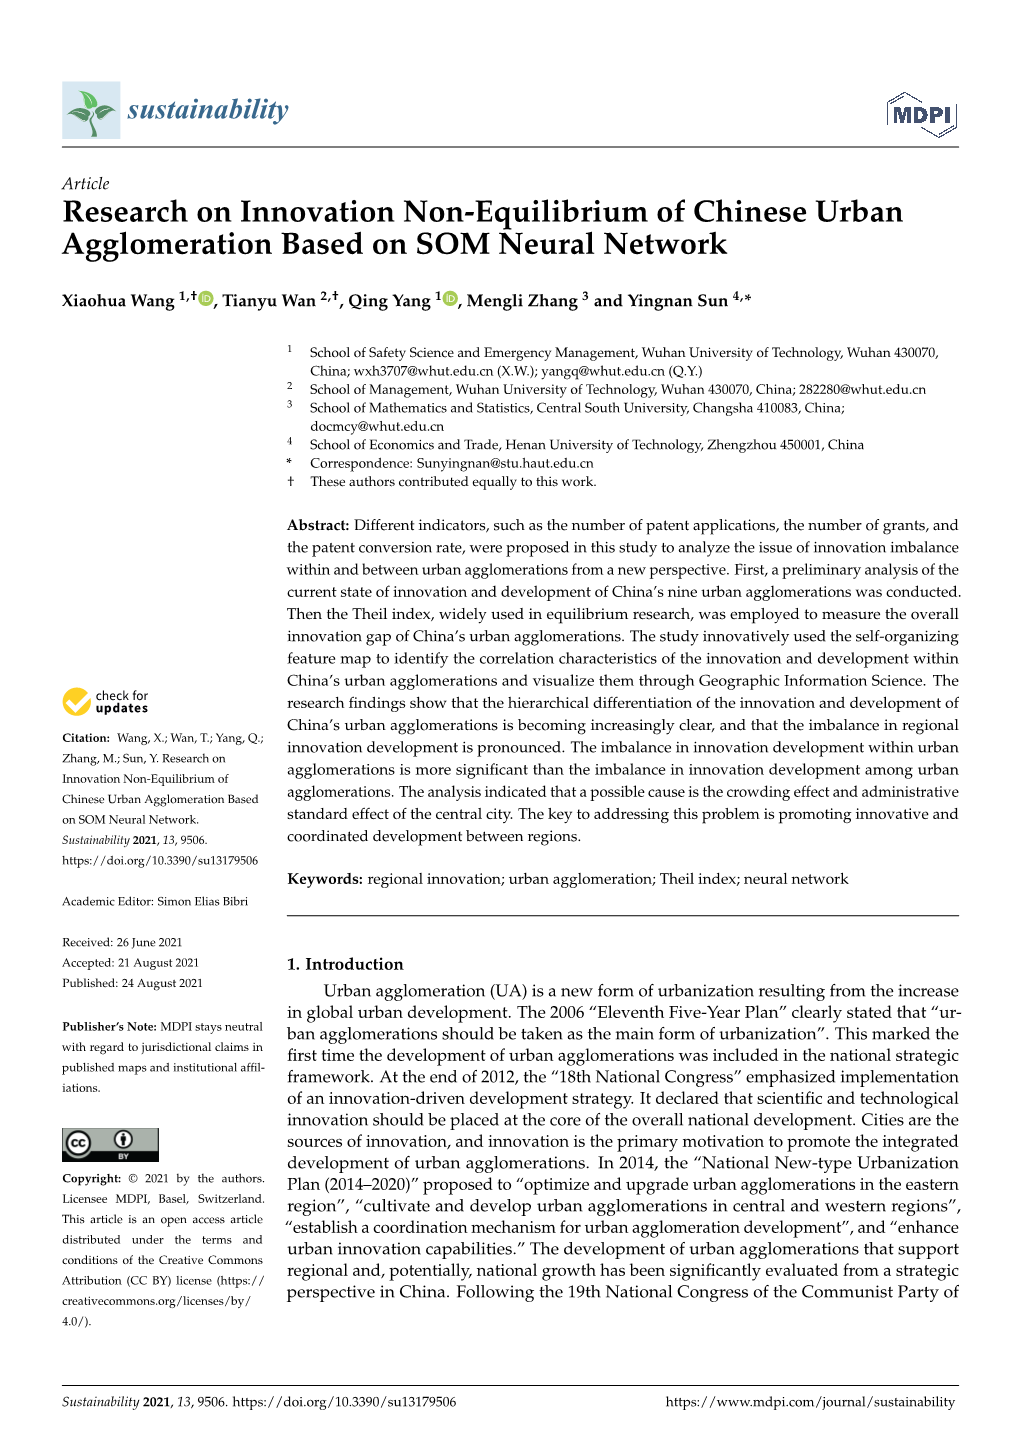 Research on Innovation Non-Equilibrium of Chinese Urban Agglomeration Based on SOM Neural Network